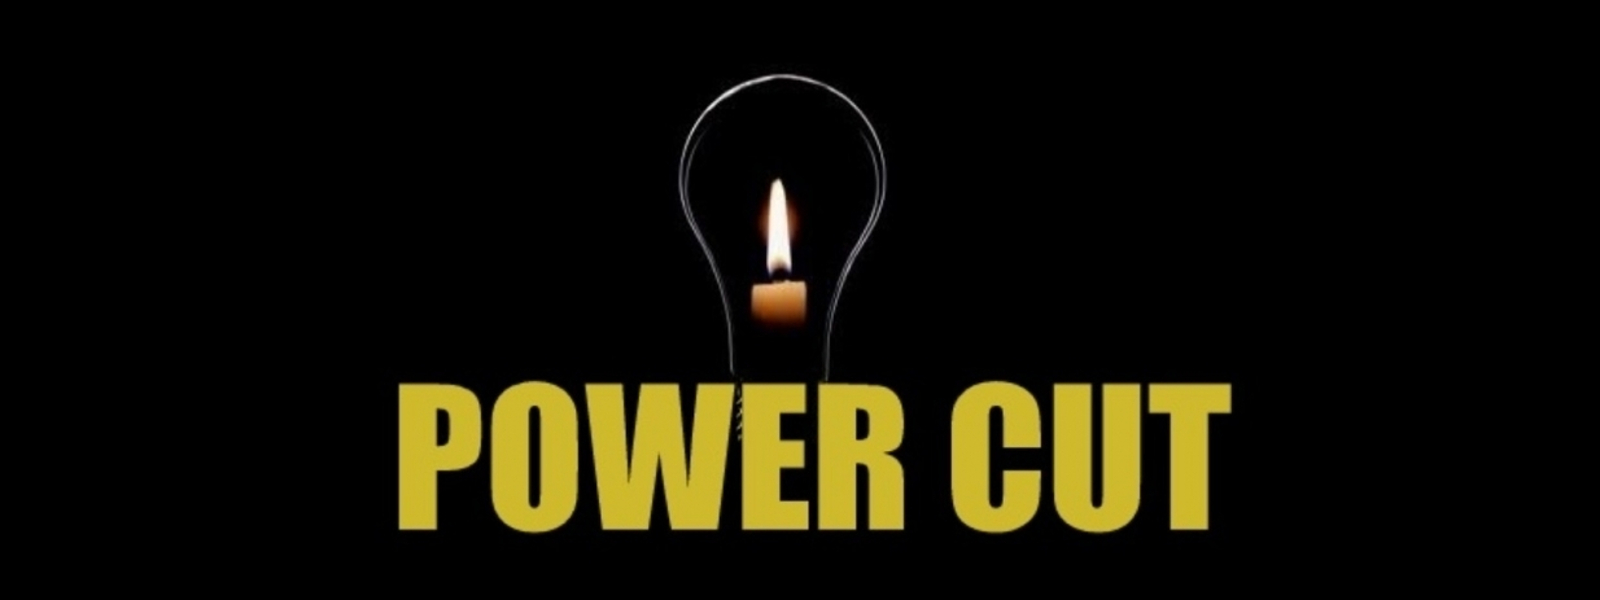 Power cut for 18th & 19th July